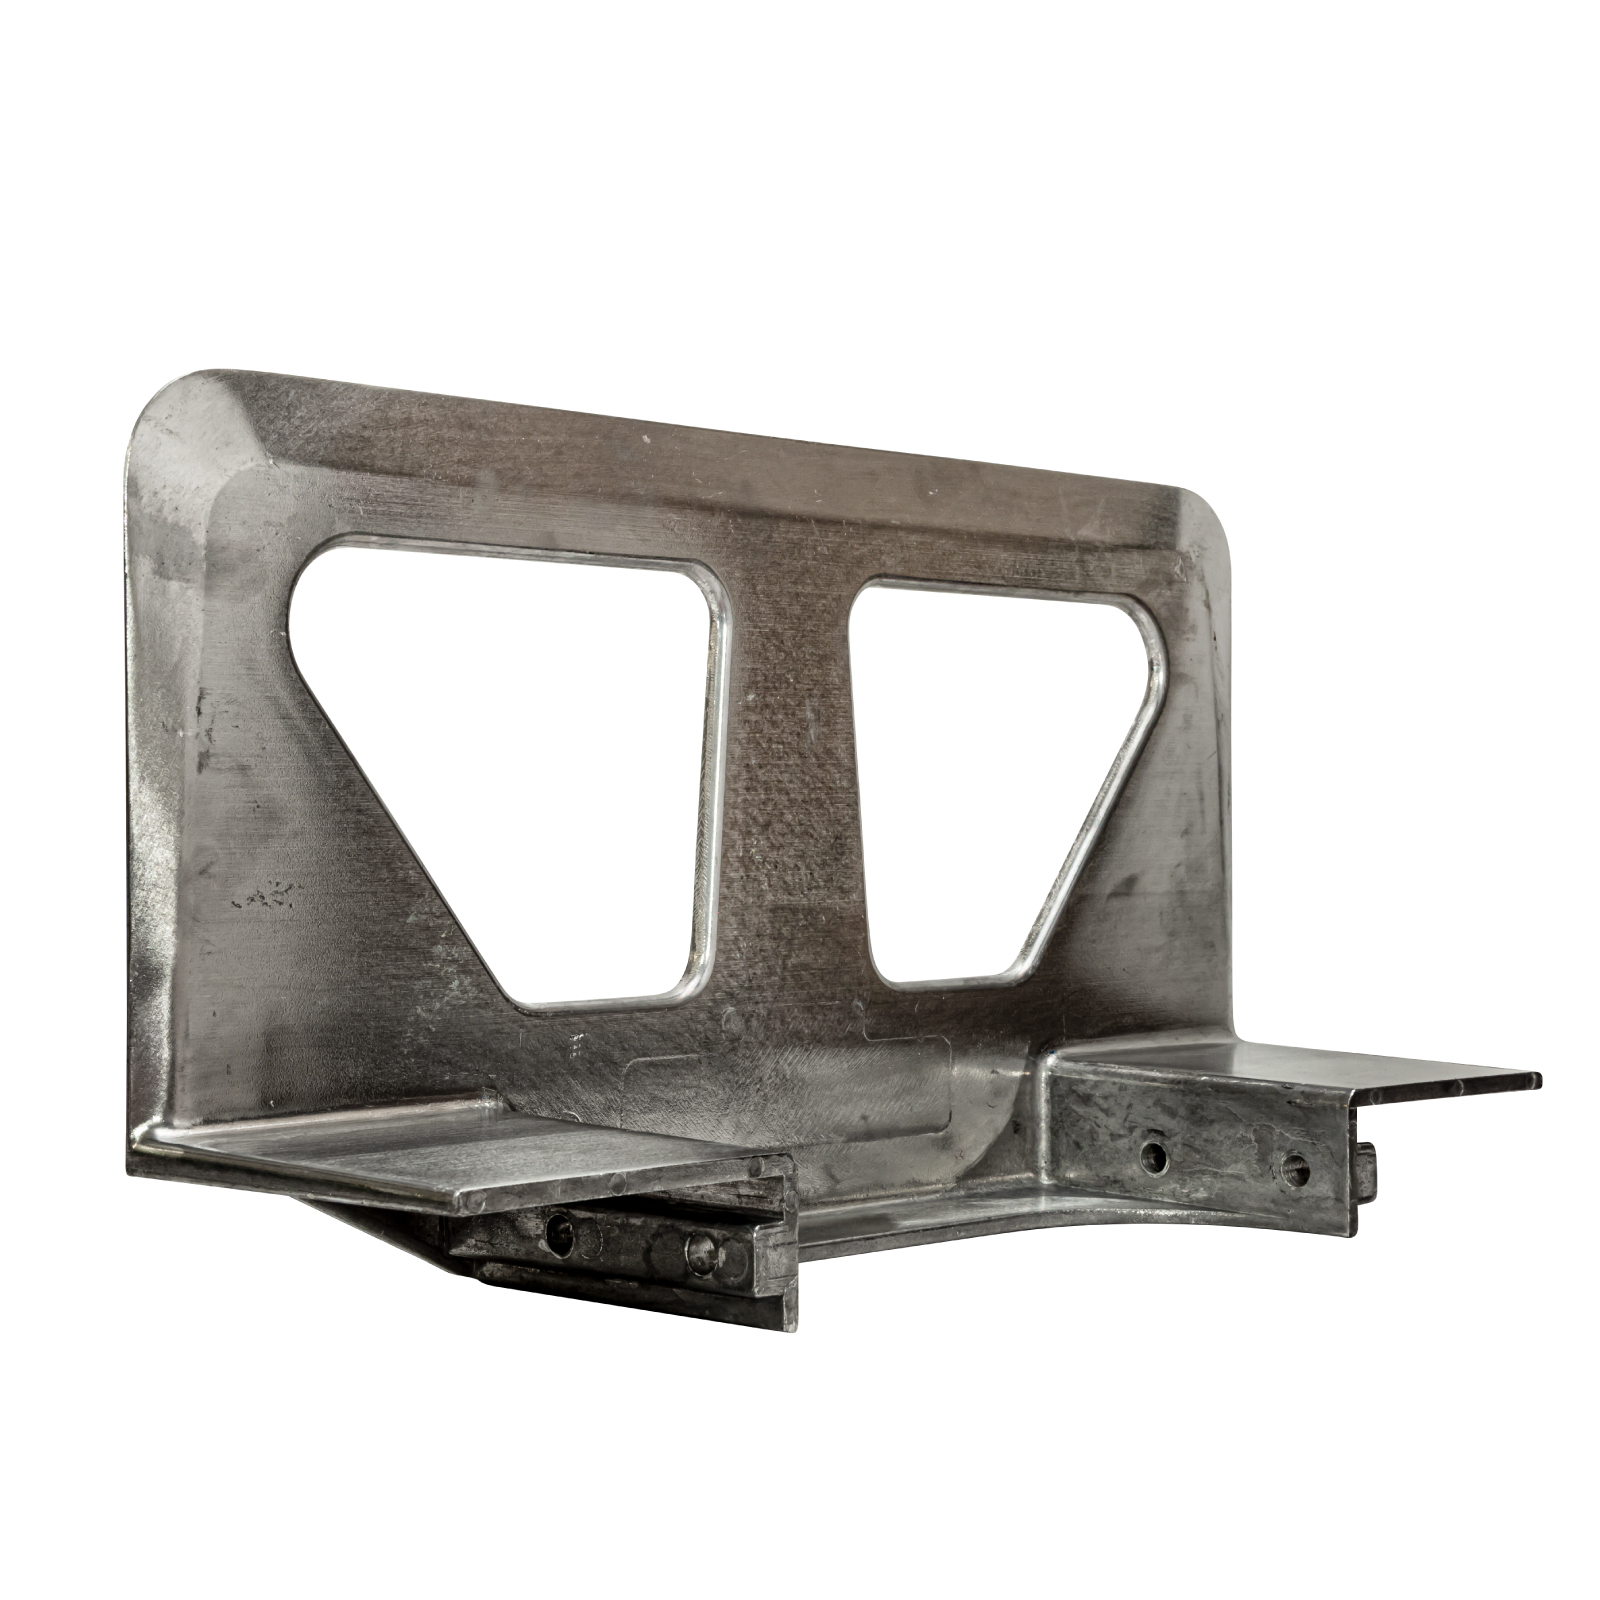 truck-main-img-Nose-plate